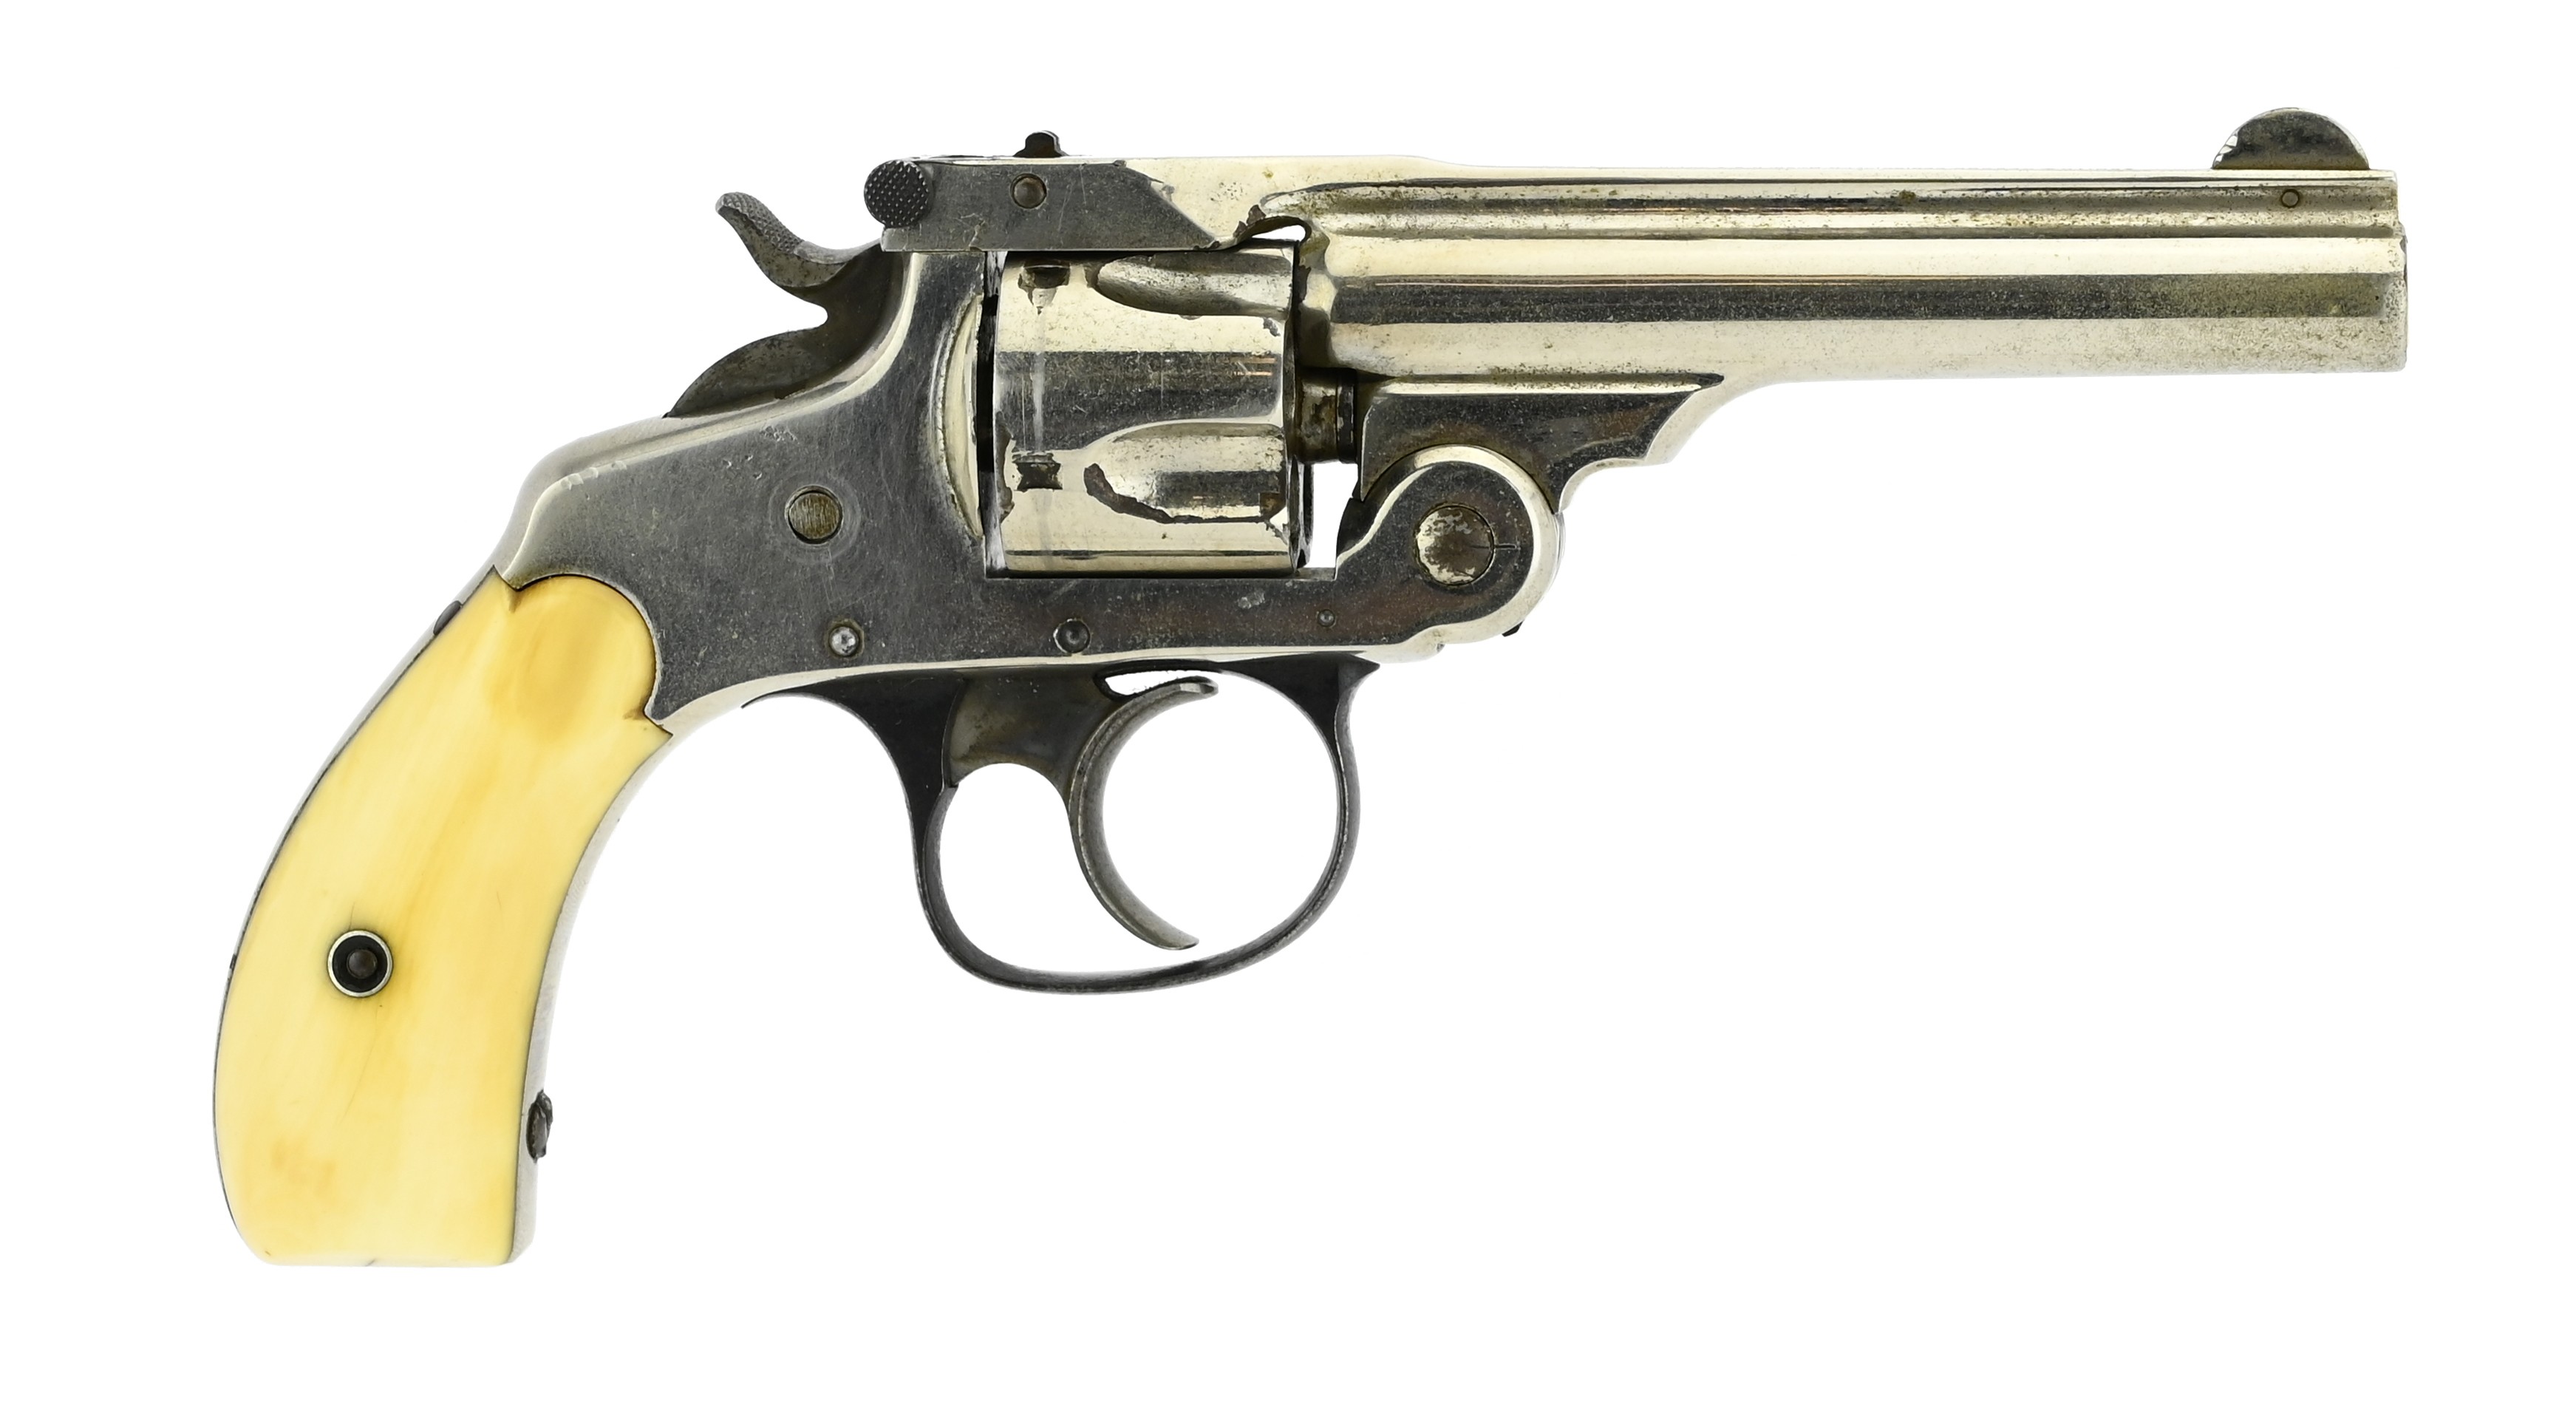 https://www.collectorsfirearms.com/677722/smith-wesson-32-double-action-fourth-model-ah5687.jpg